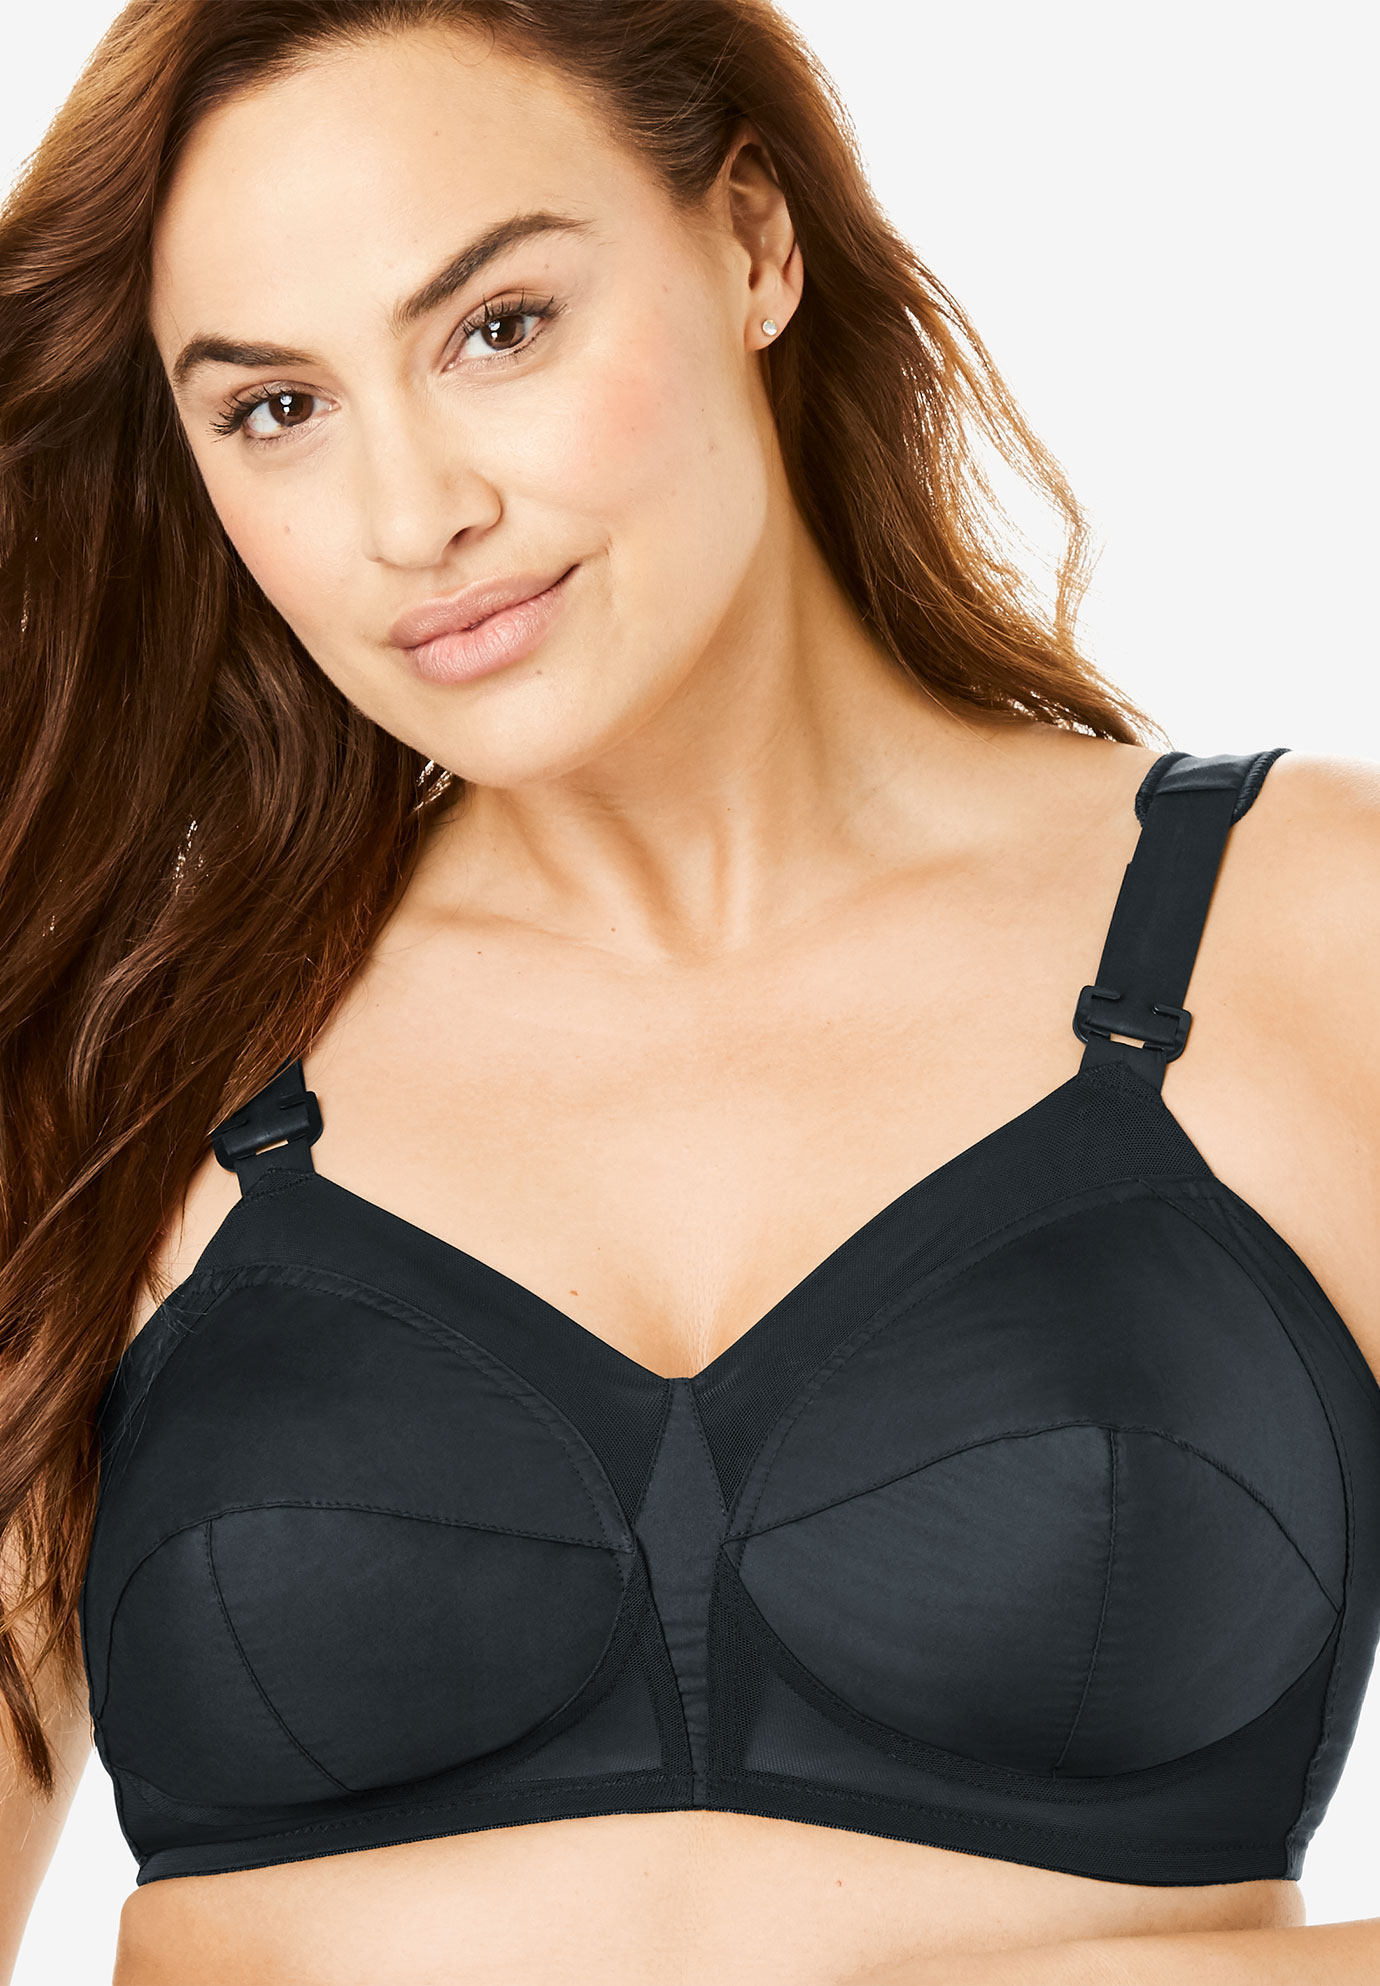 Exquisite Form Fully Original Support Wireless Bra 5100532 Plus Size 